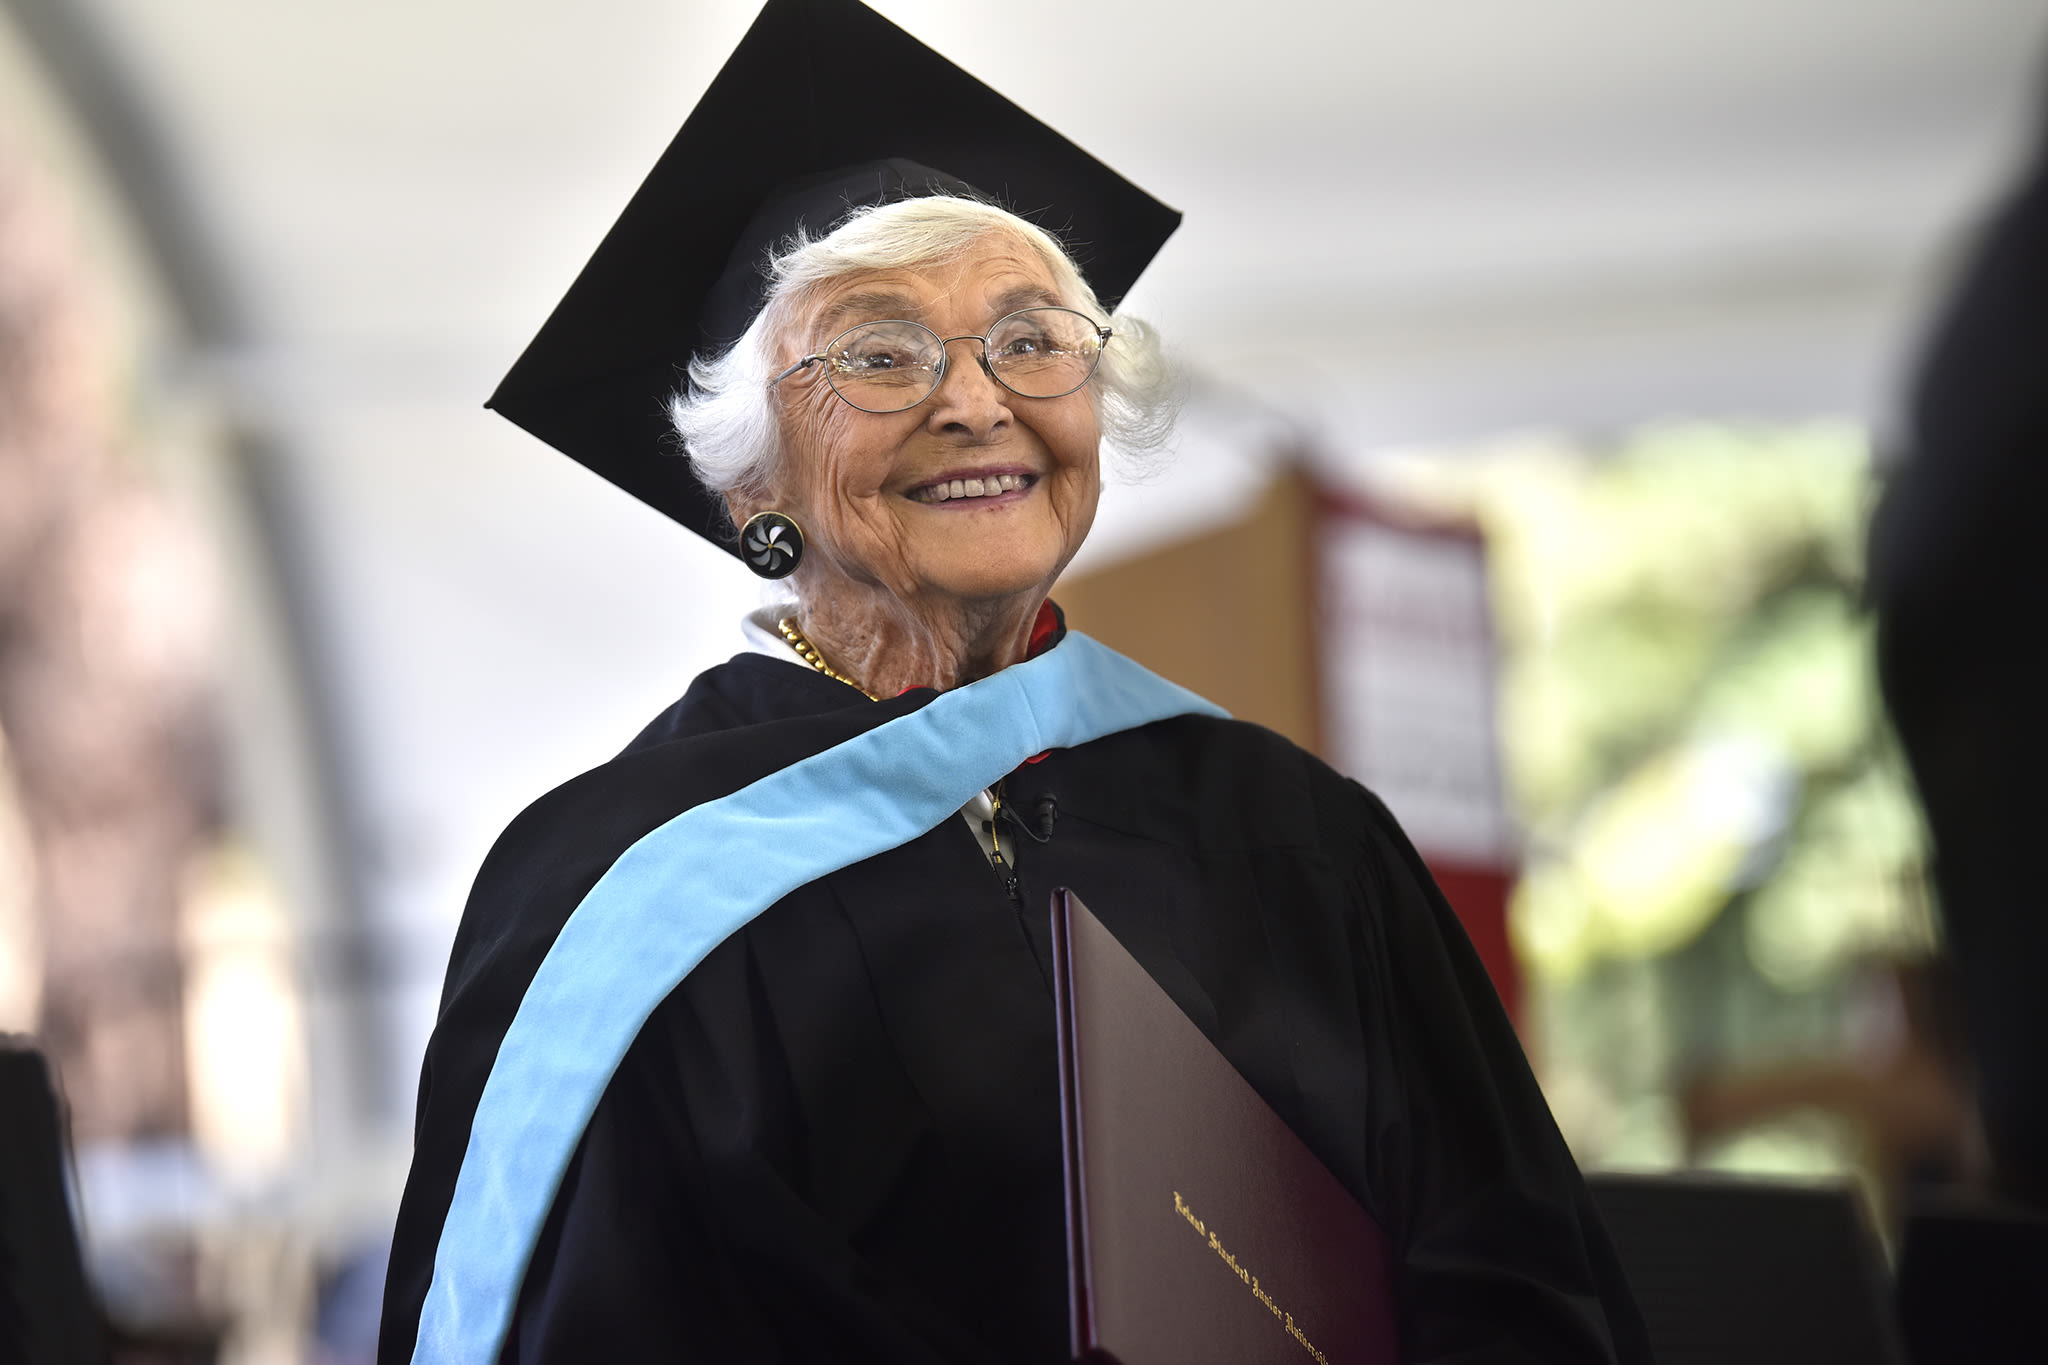 Her master’s degree was on hold during WWII. She just received it at age 105.